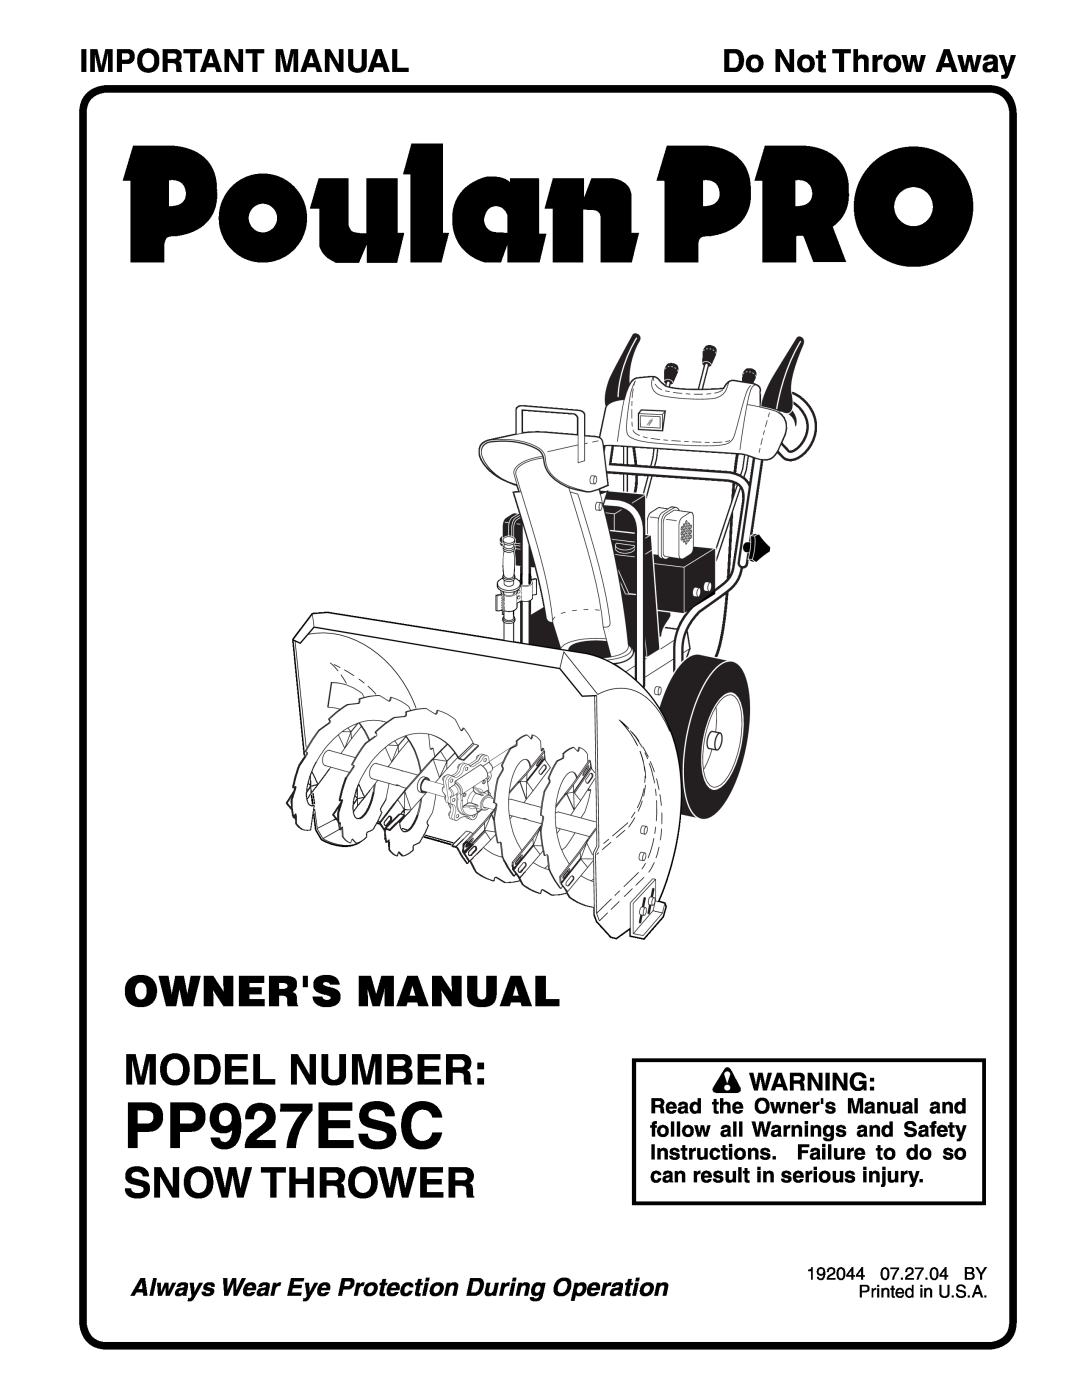 Poulan PP927ESC owner manual Owners Manual Model Number, Snow Thrower, Important Manual, Do Not Throw Away 